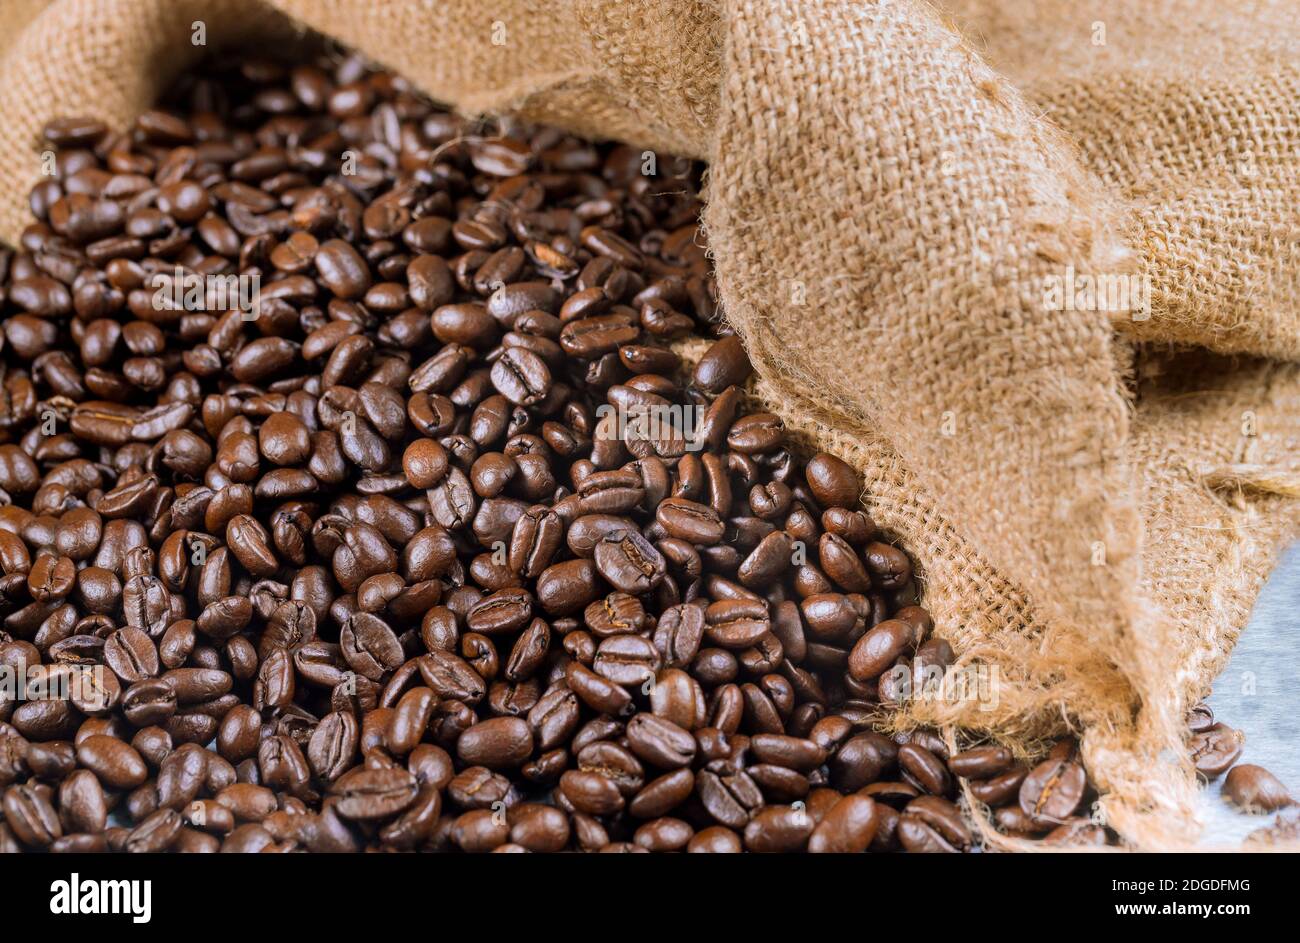 Coffee beans in a bagging. Close up. Stock Photo